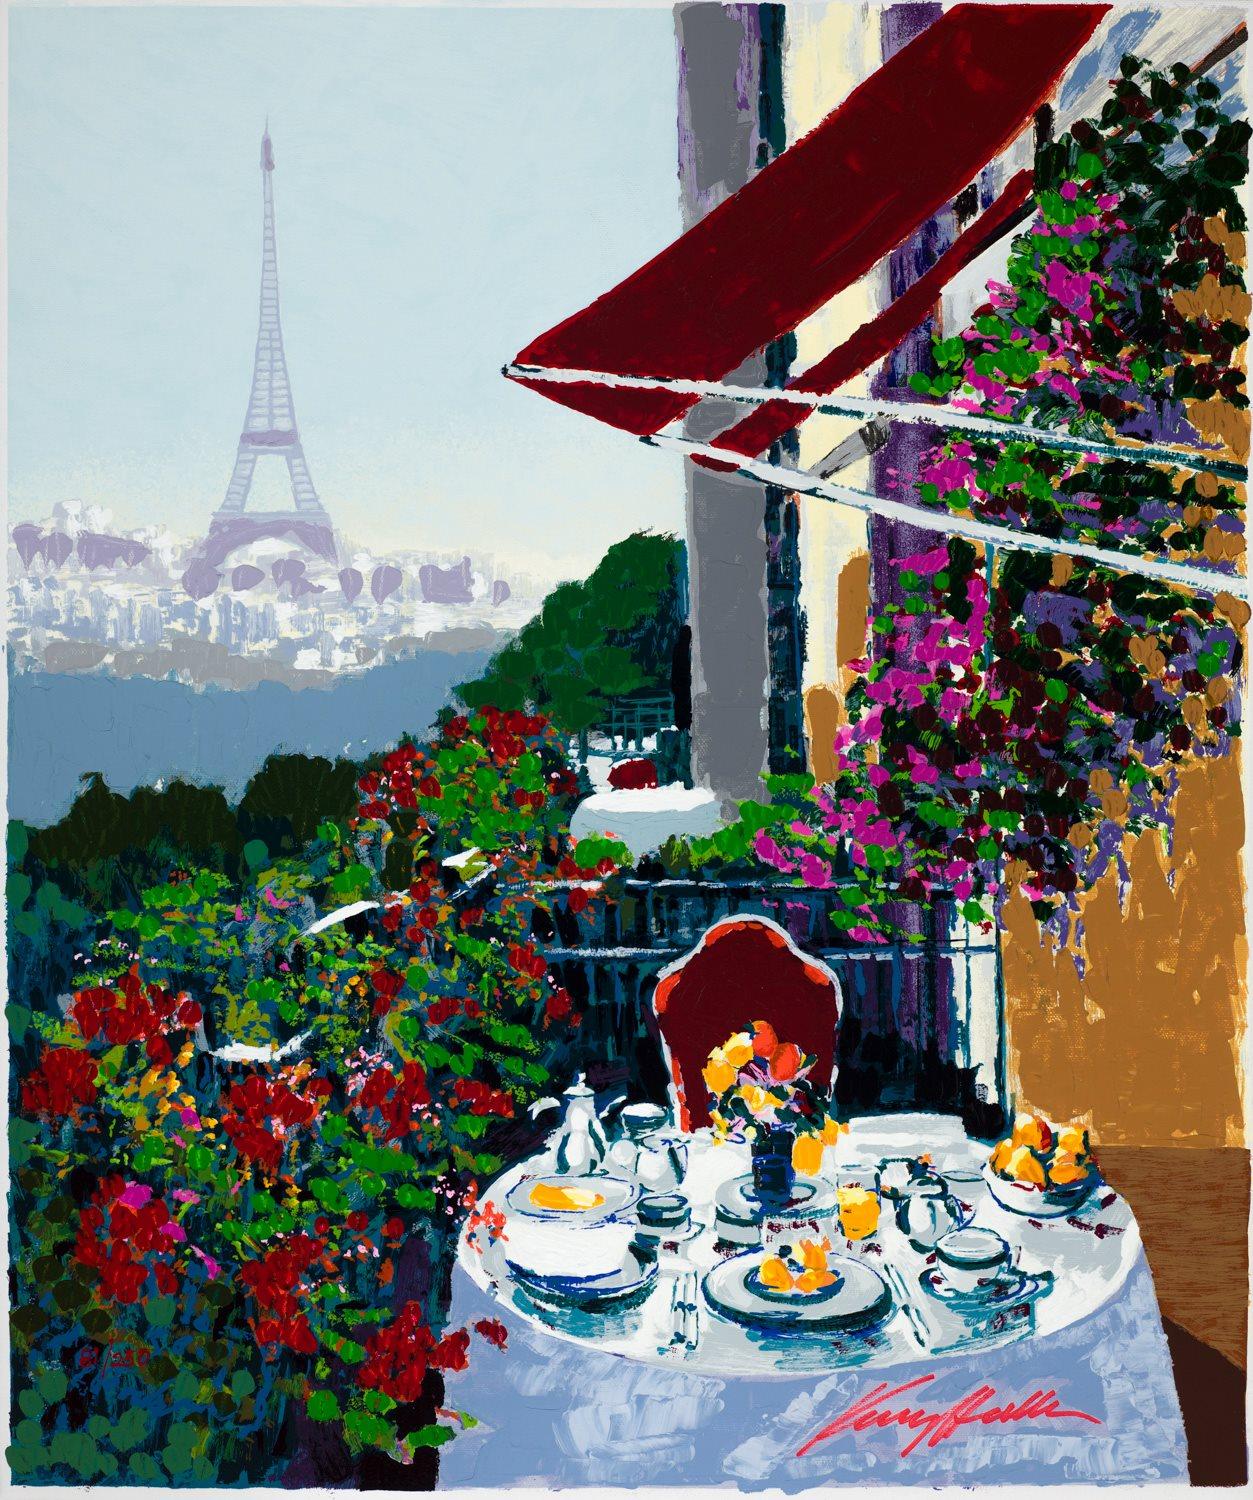 Paris Sunrise is a hand-enhanced serigraph on canvas, image size 25 x 21 inches, signed ‘Kerry Hallam’ lower right and annotated lower left. From the edition of 281, numbered 81/250 (there were also 10 AP), and framed in a classic, gold-tone